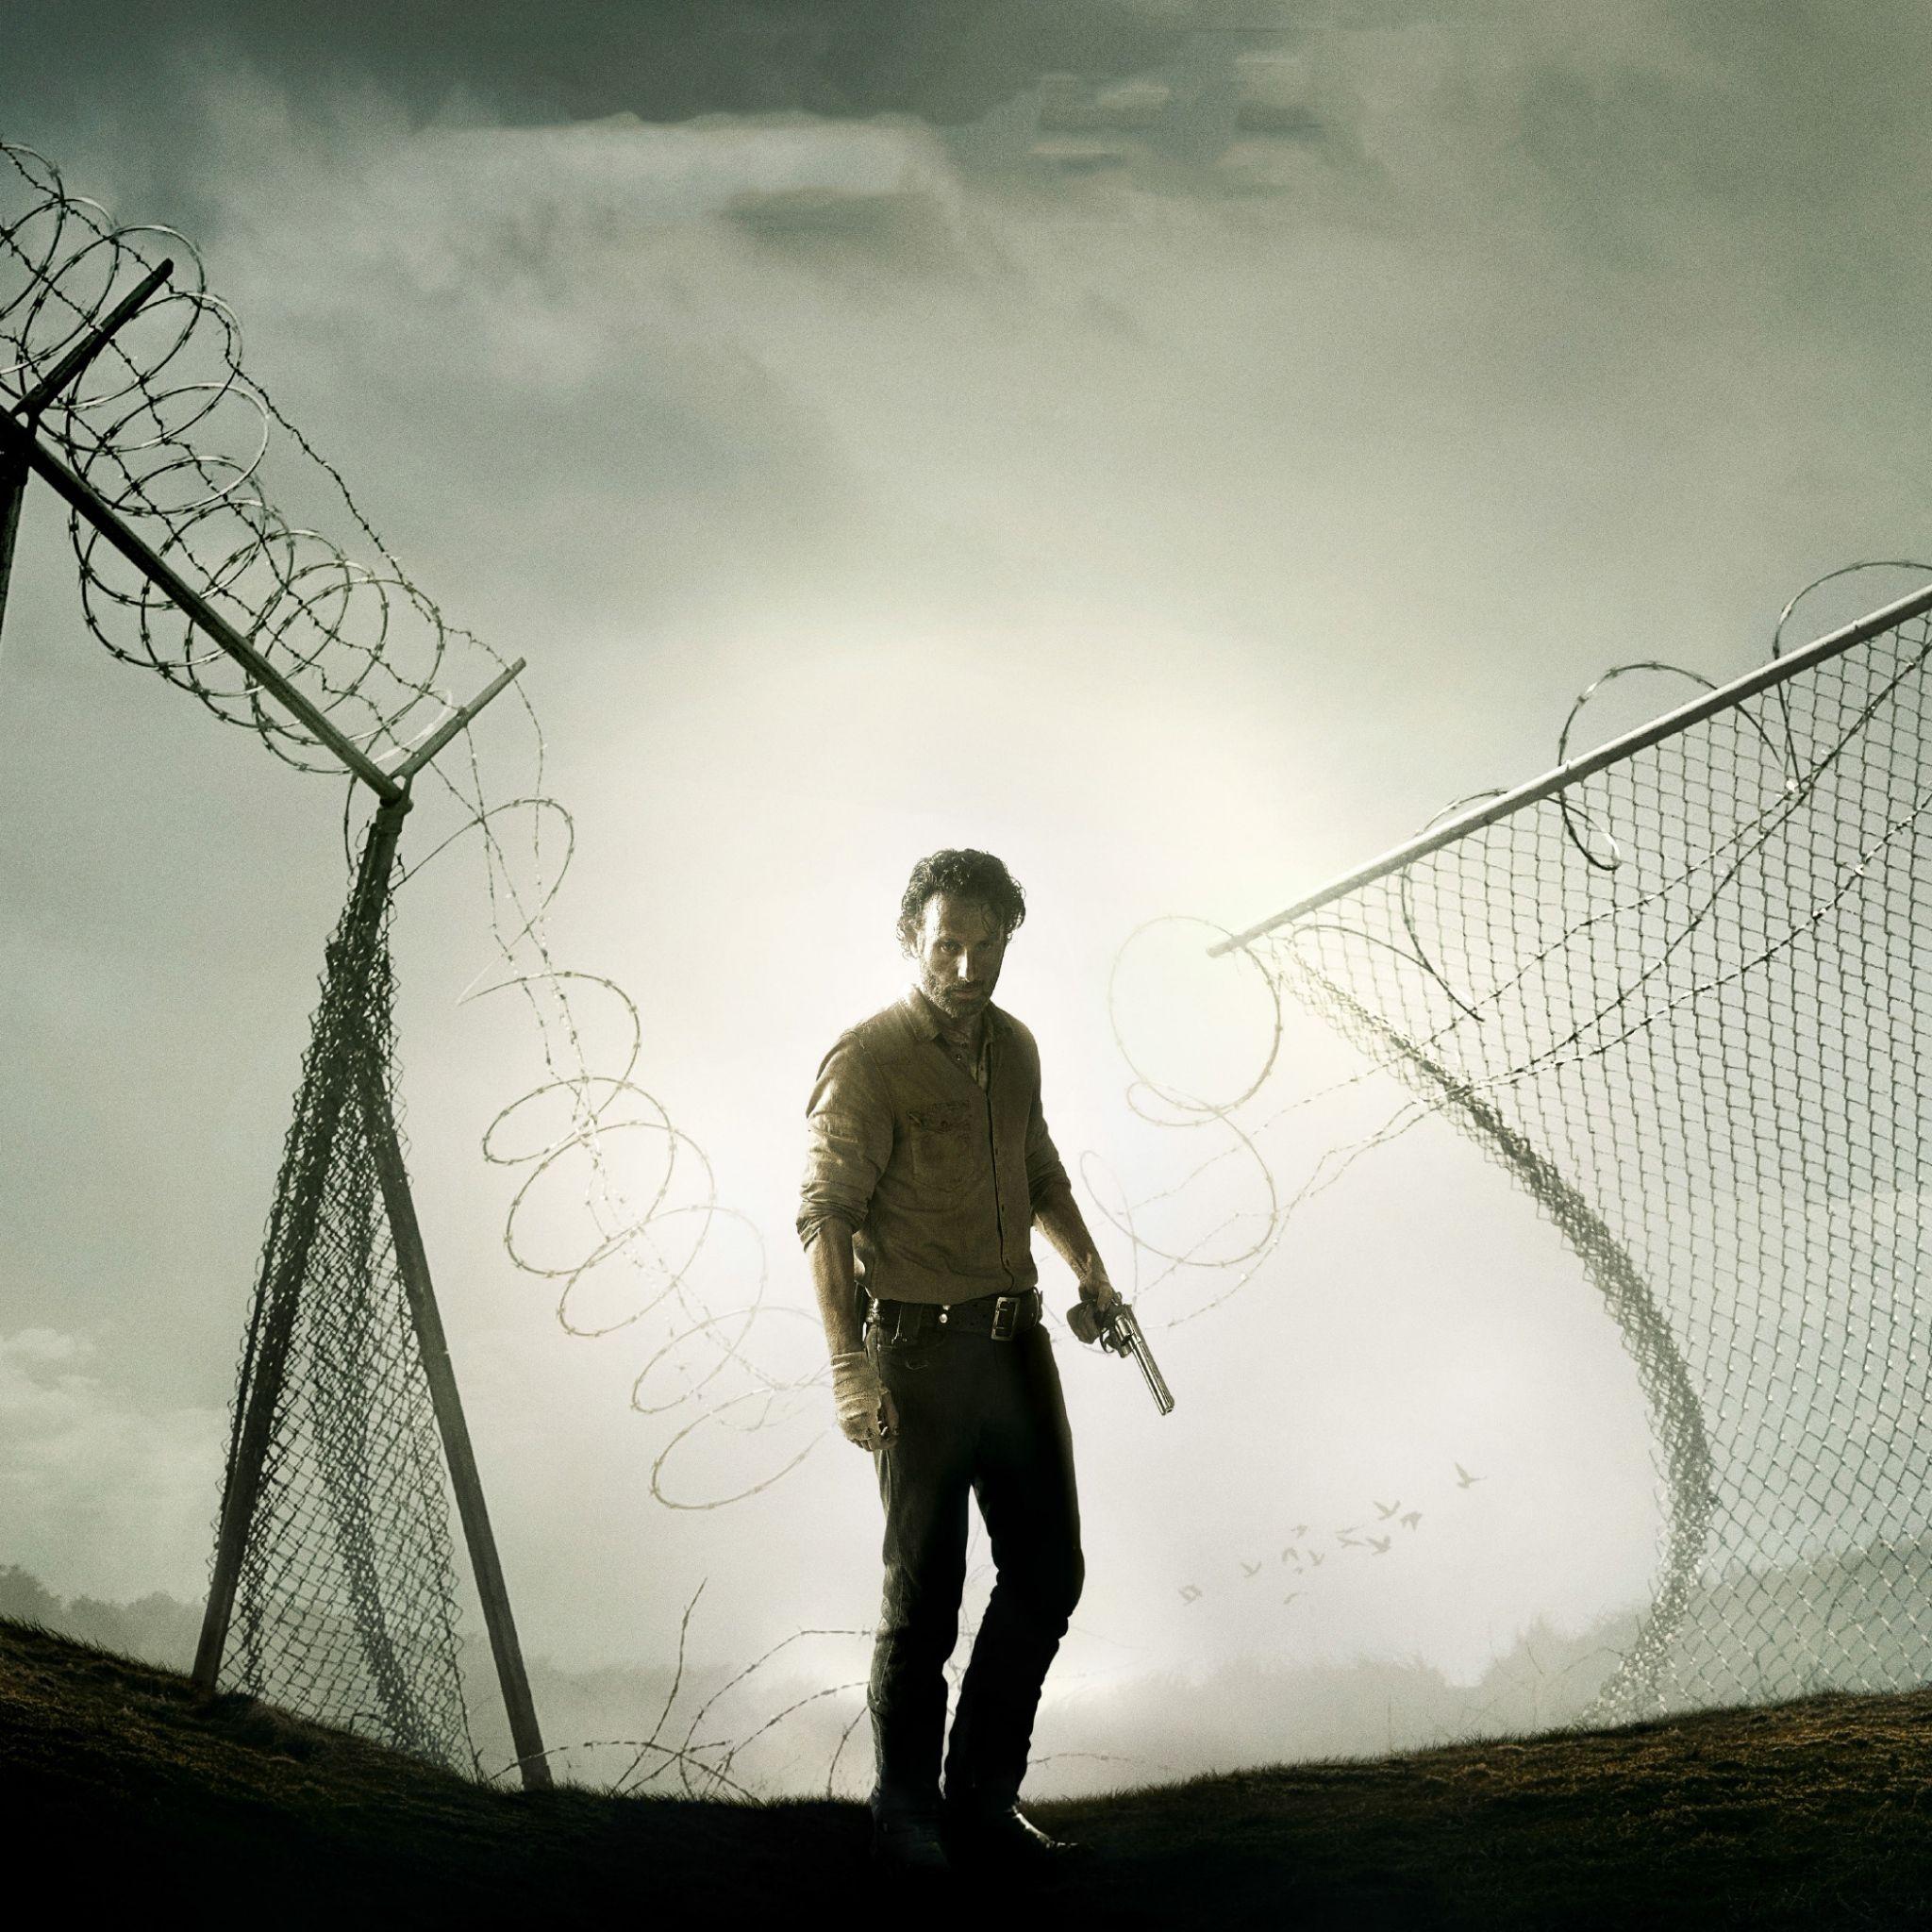 The Walking Dead wallpaper for iPhone and iPad